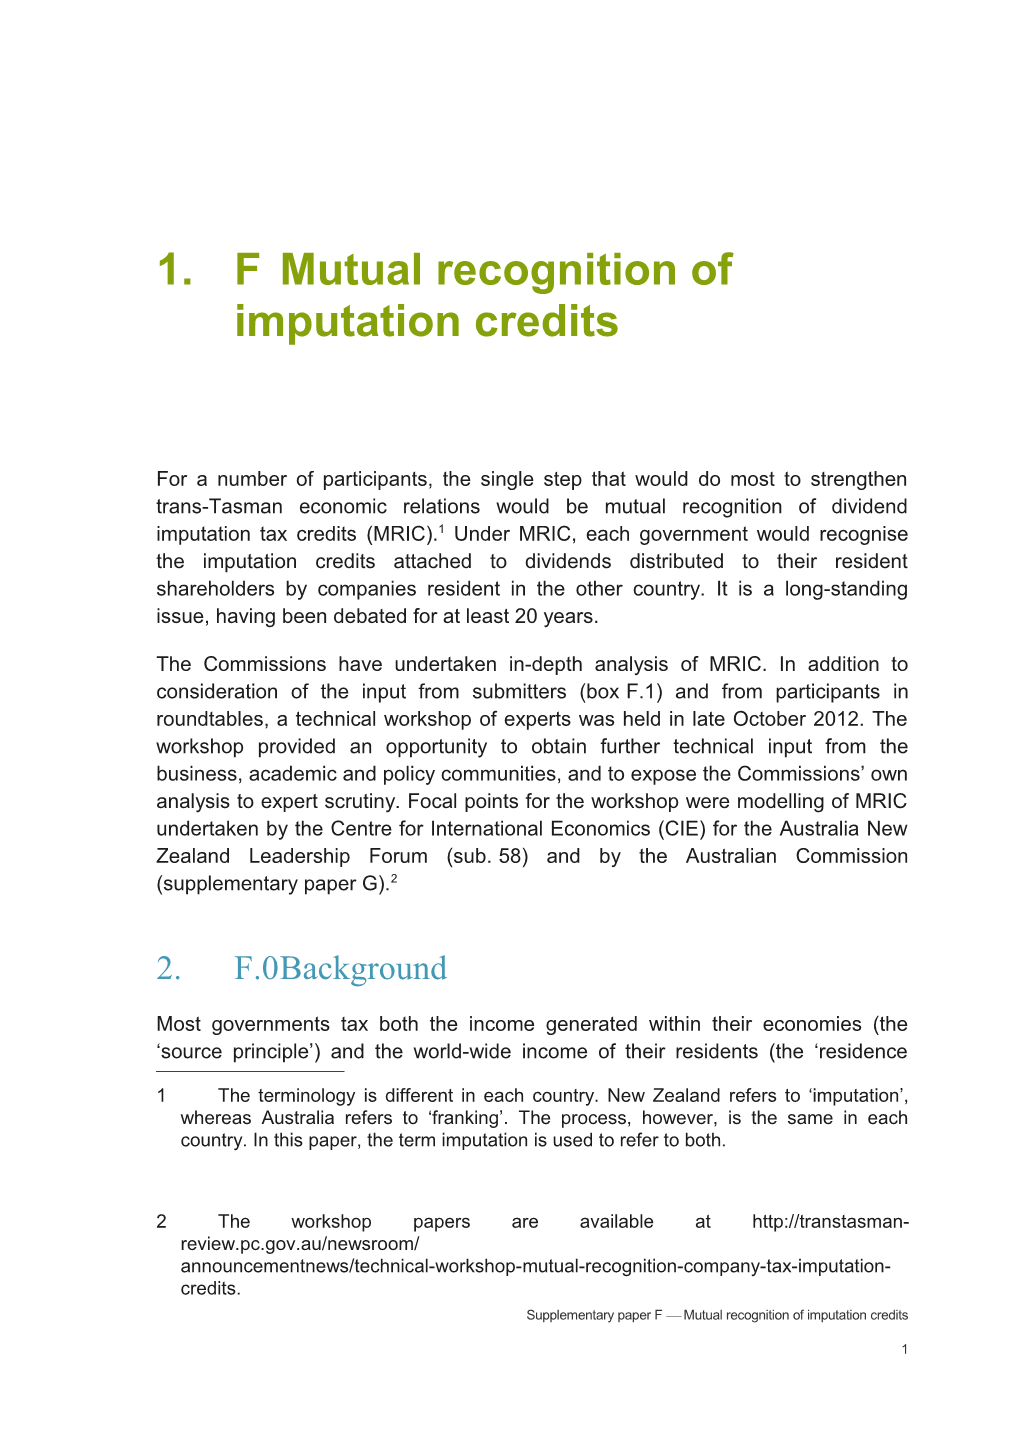 Fmutual Recognition of Imputation Credits